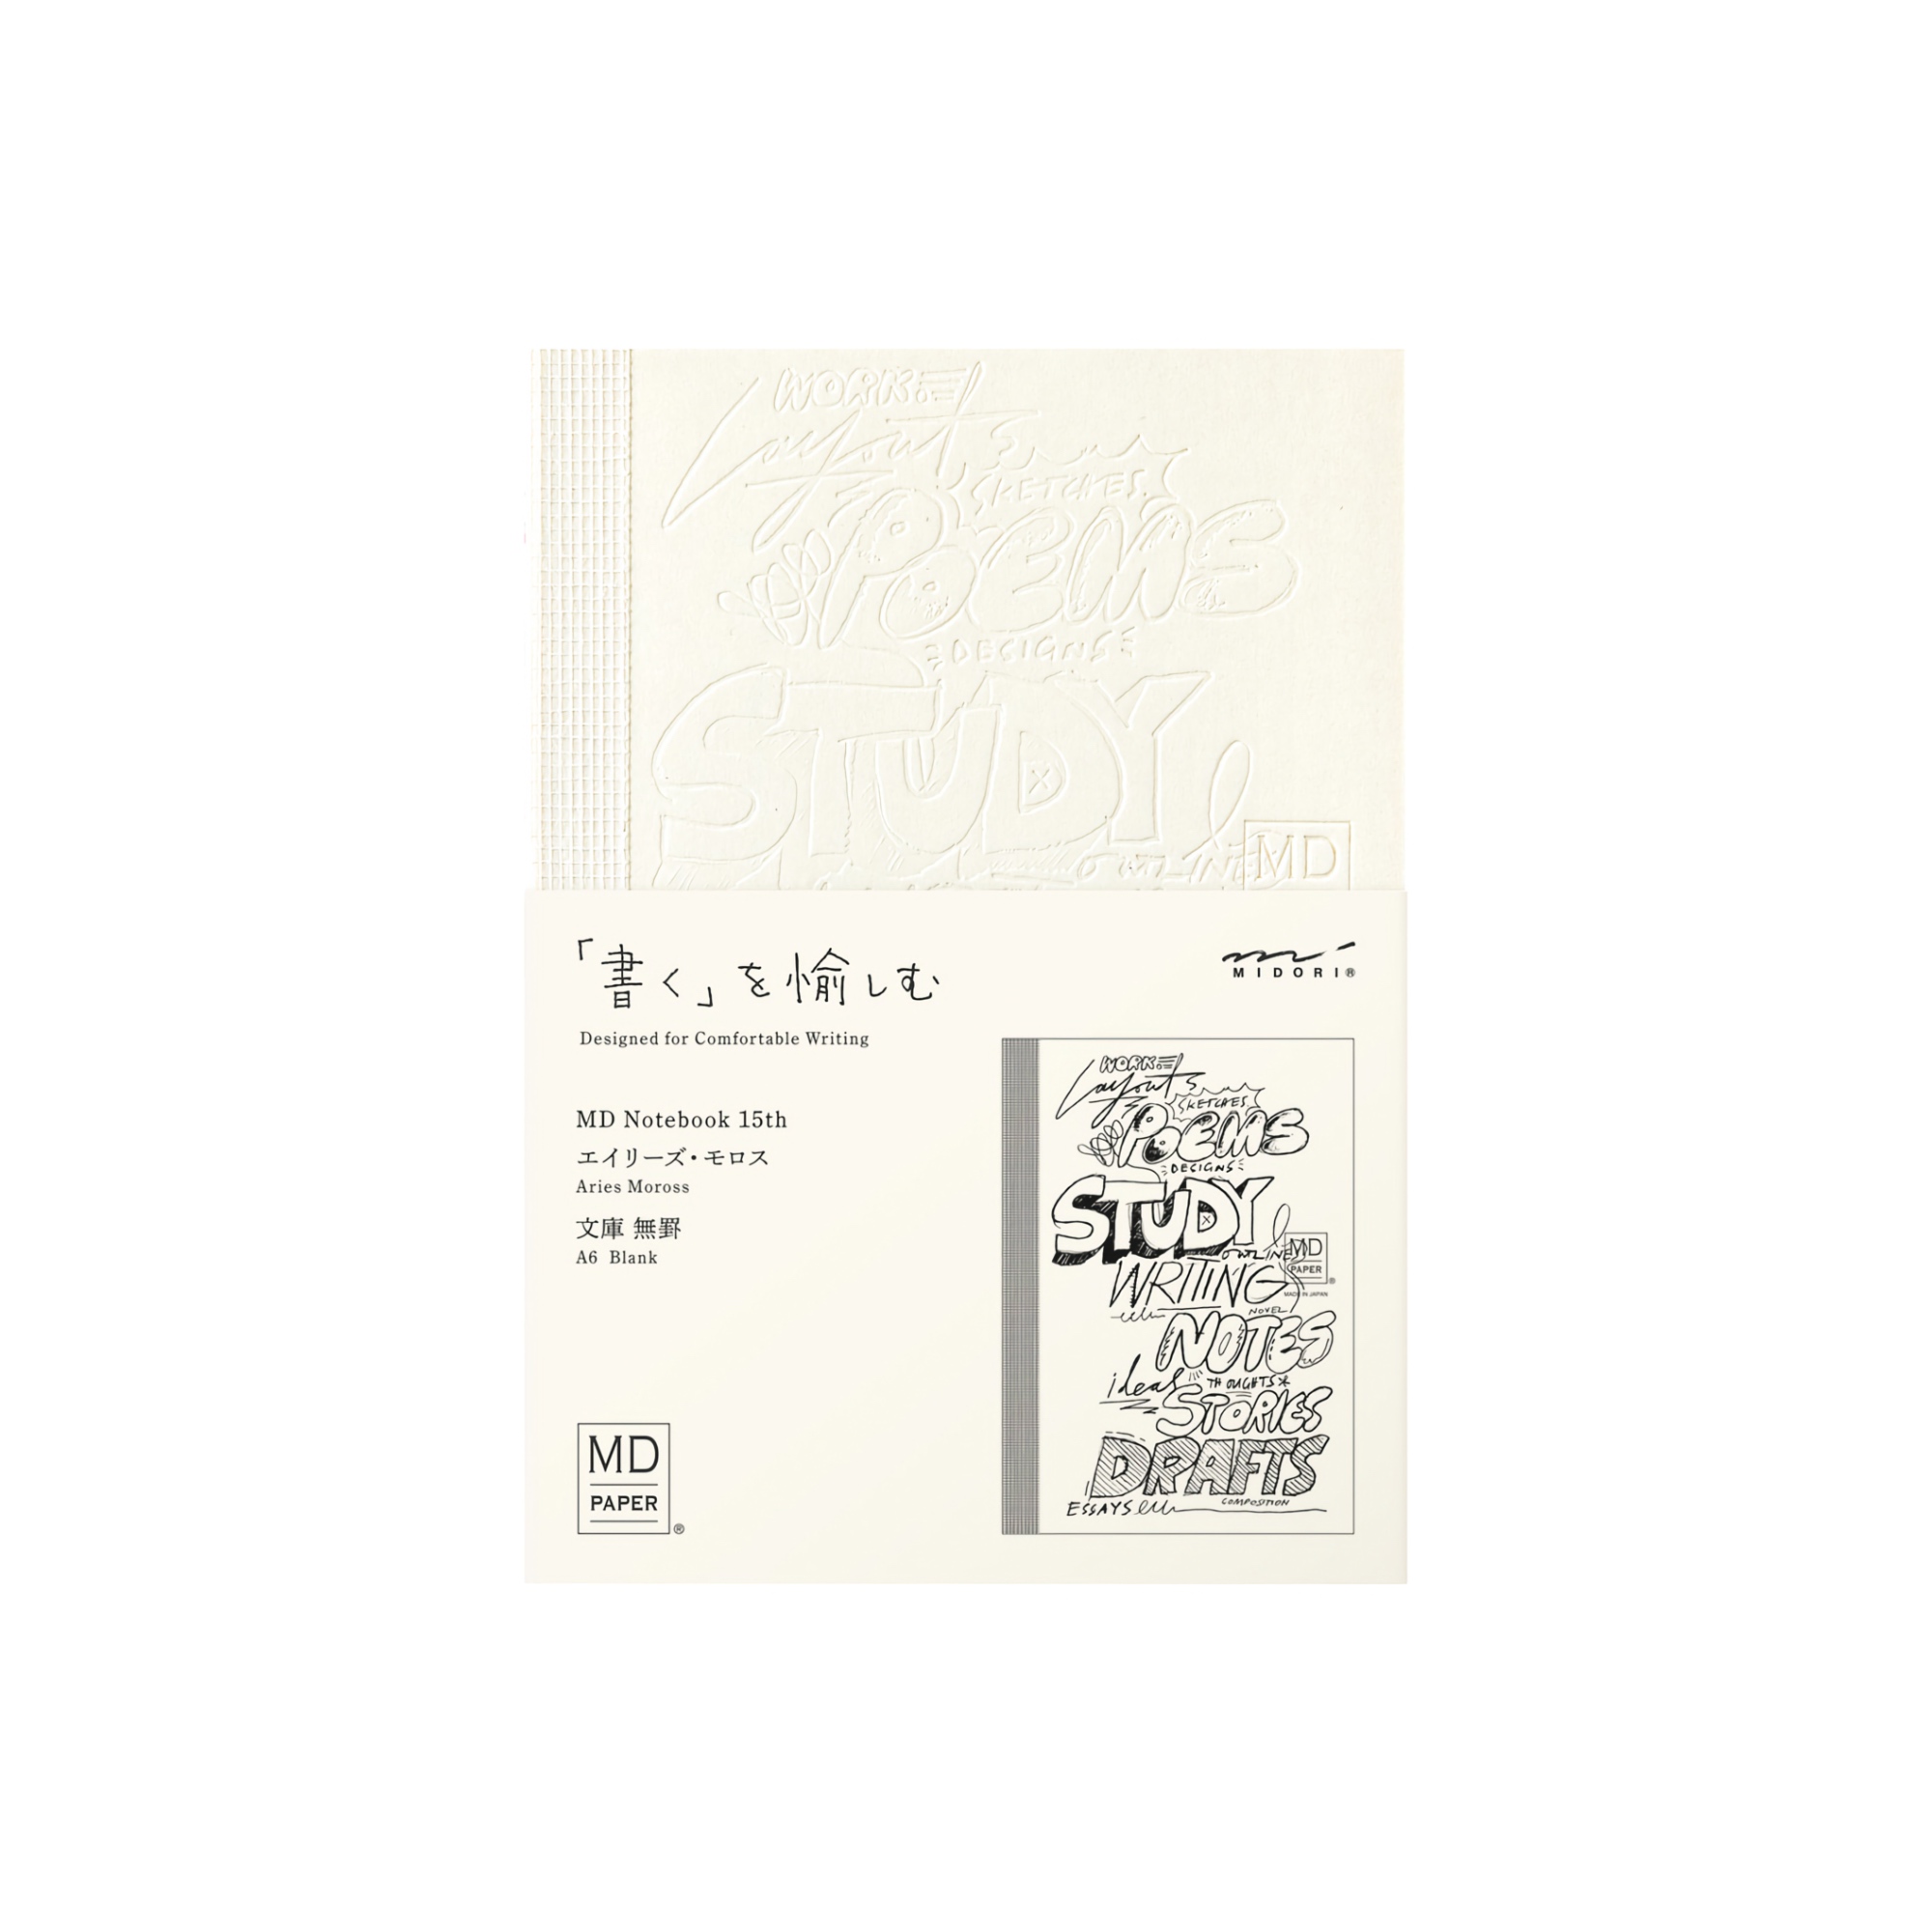 Midori MD Notebook [A6] Blank Artist Collaboration Aries Moross 15th Anniversary [Limited Edition]